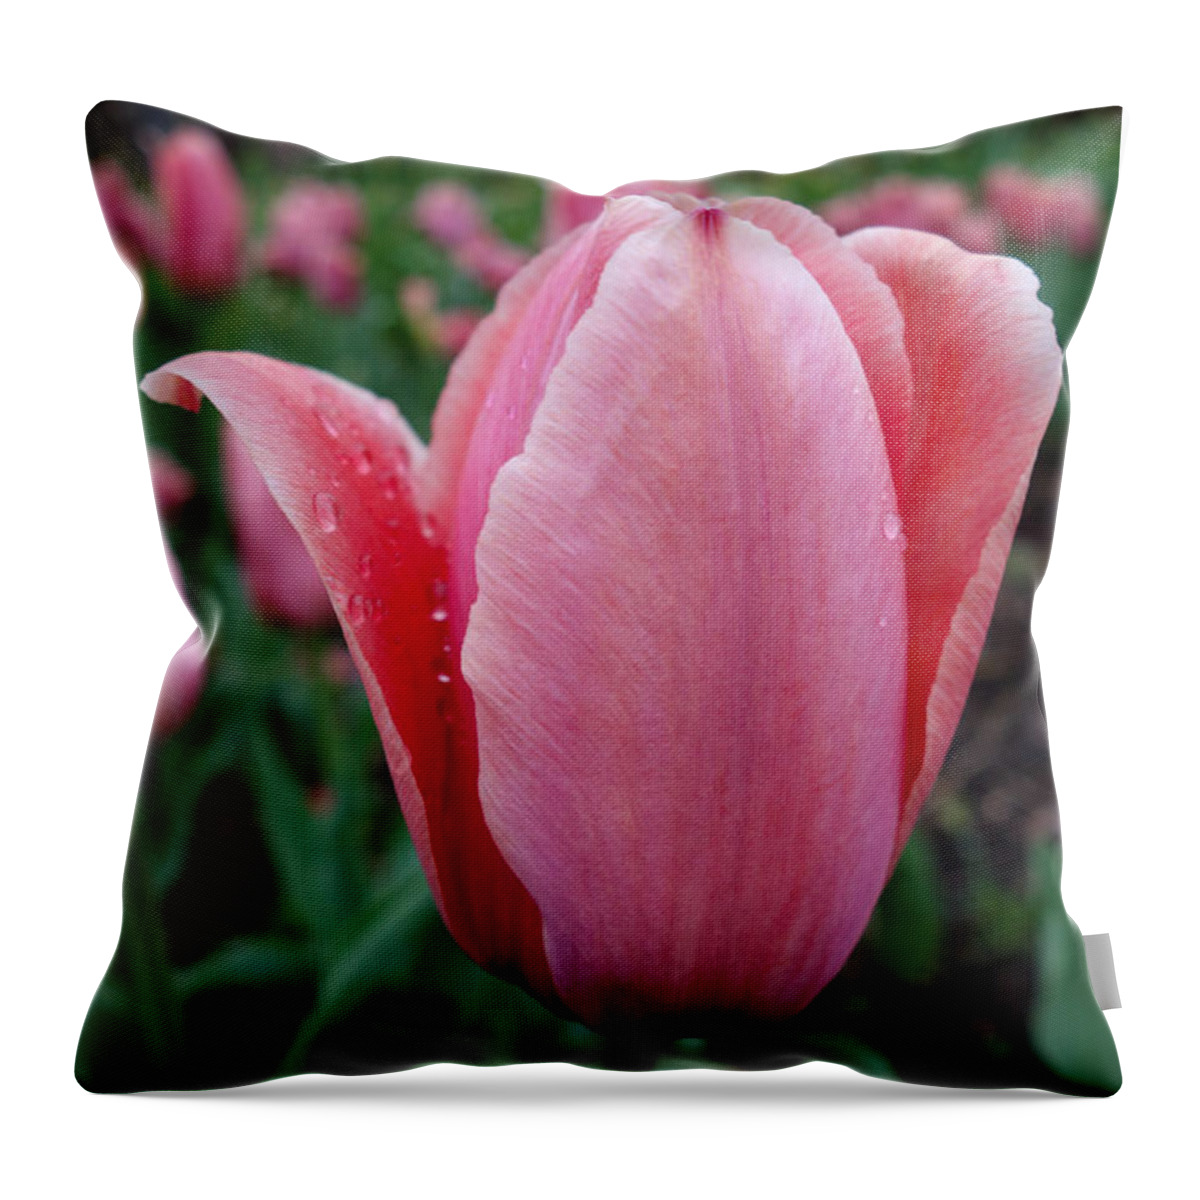 Dewy Tulip Flower Throw Pillow featuring the photograph Dewy Tulip by Jacqueline Athmann